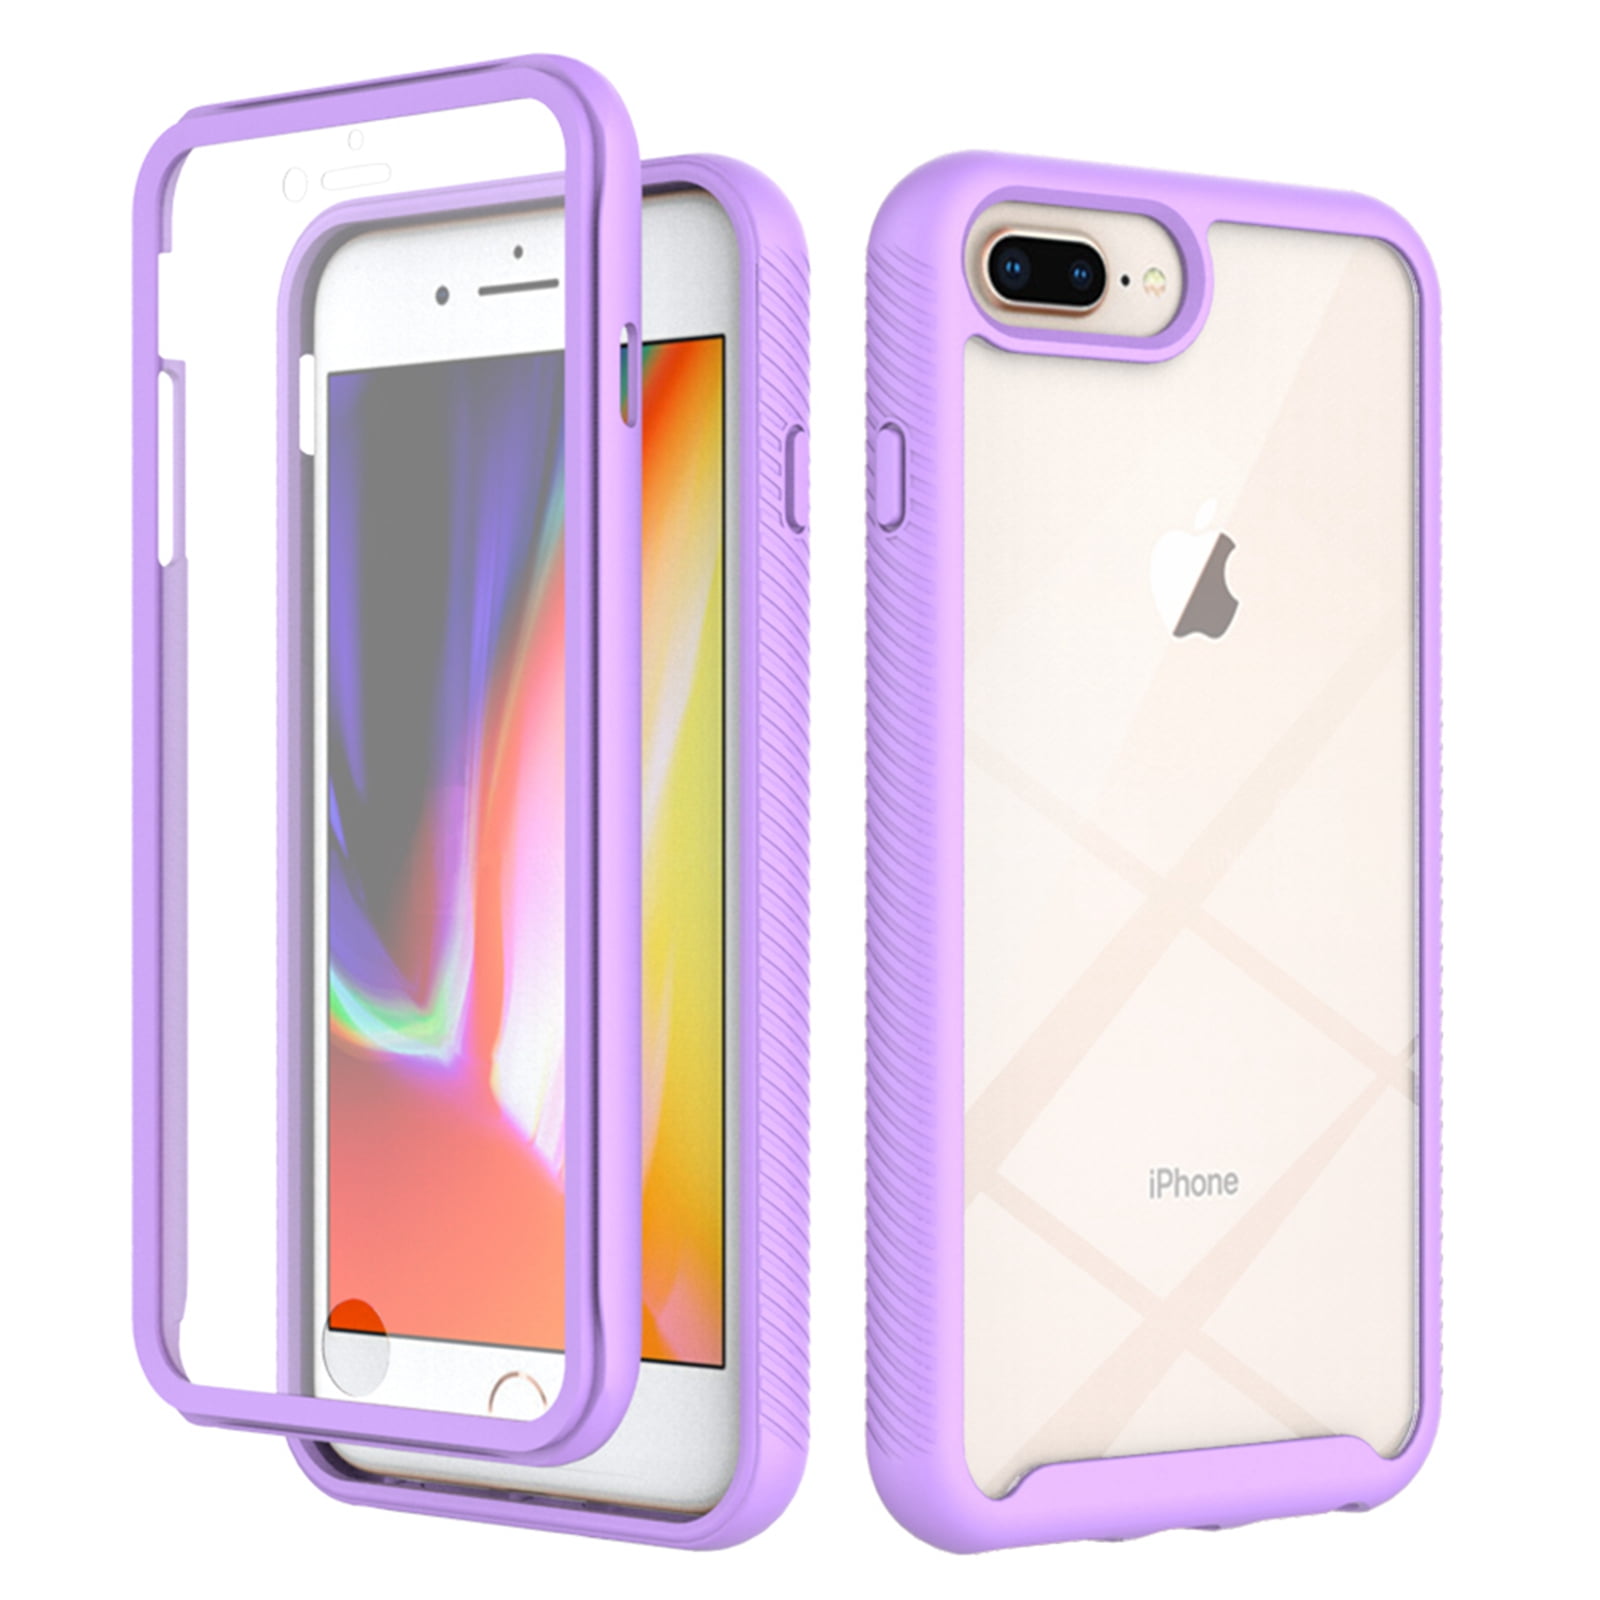 iPhone 7 Plus/8 Plus Case with Built in Screen Protector,Dteck